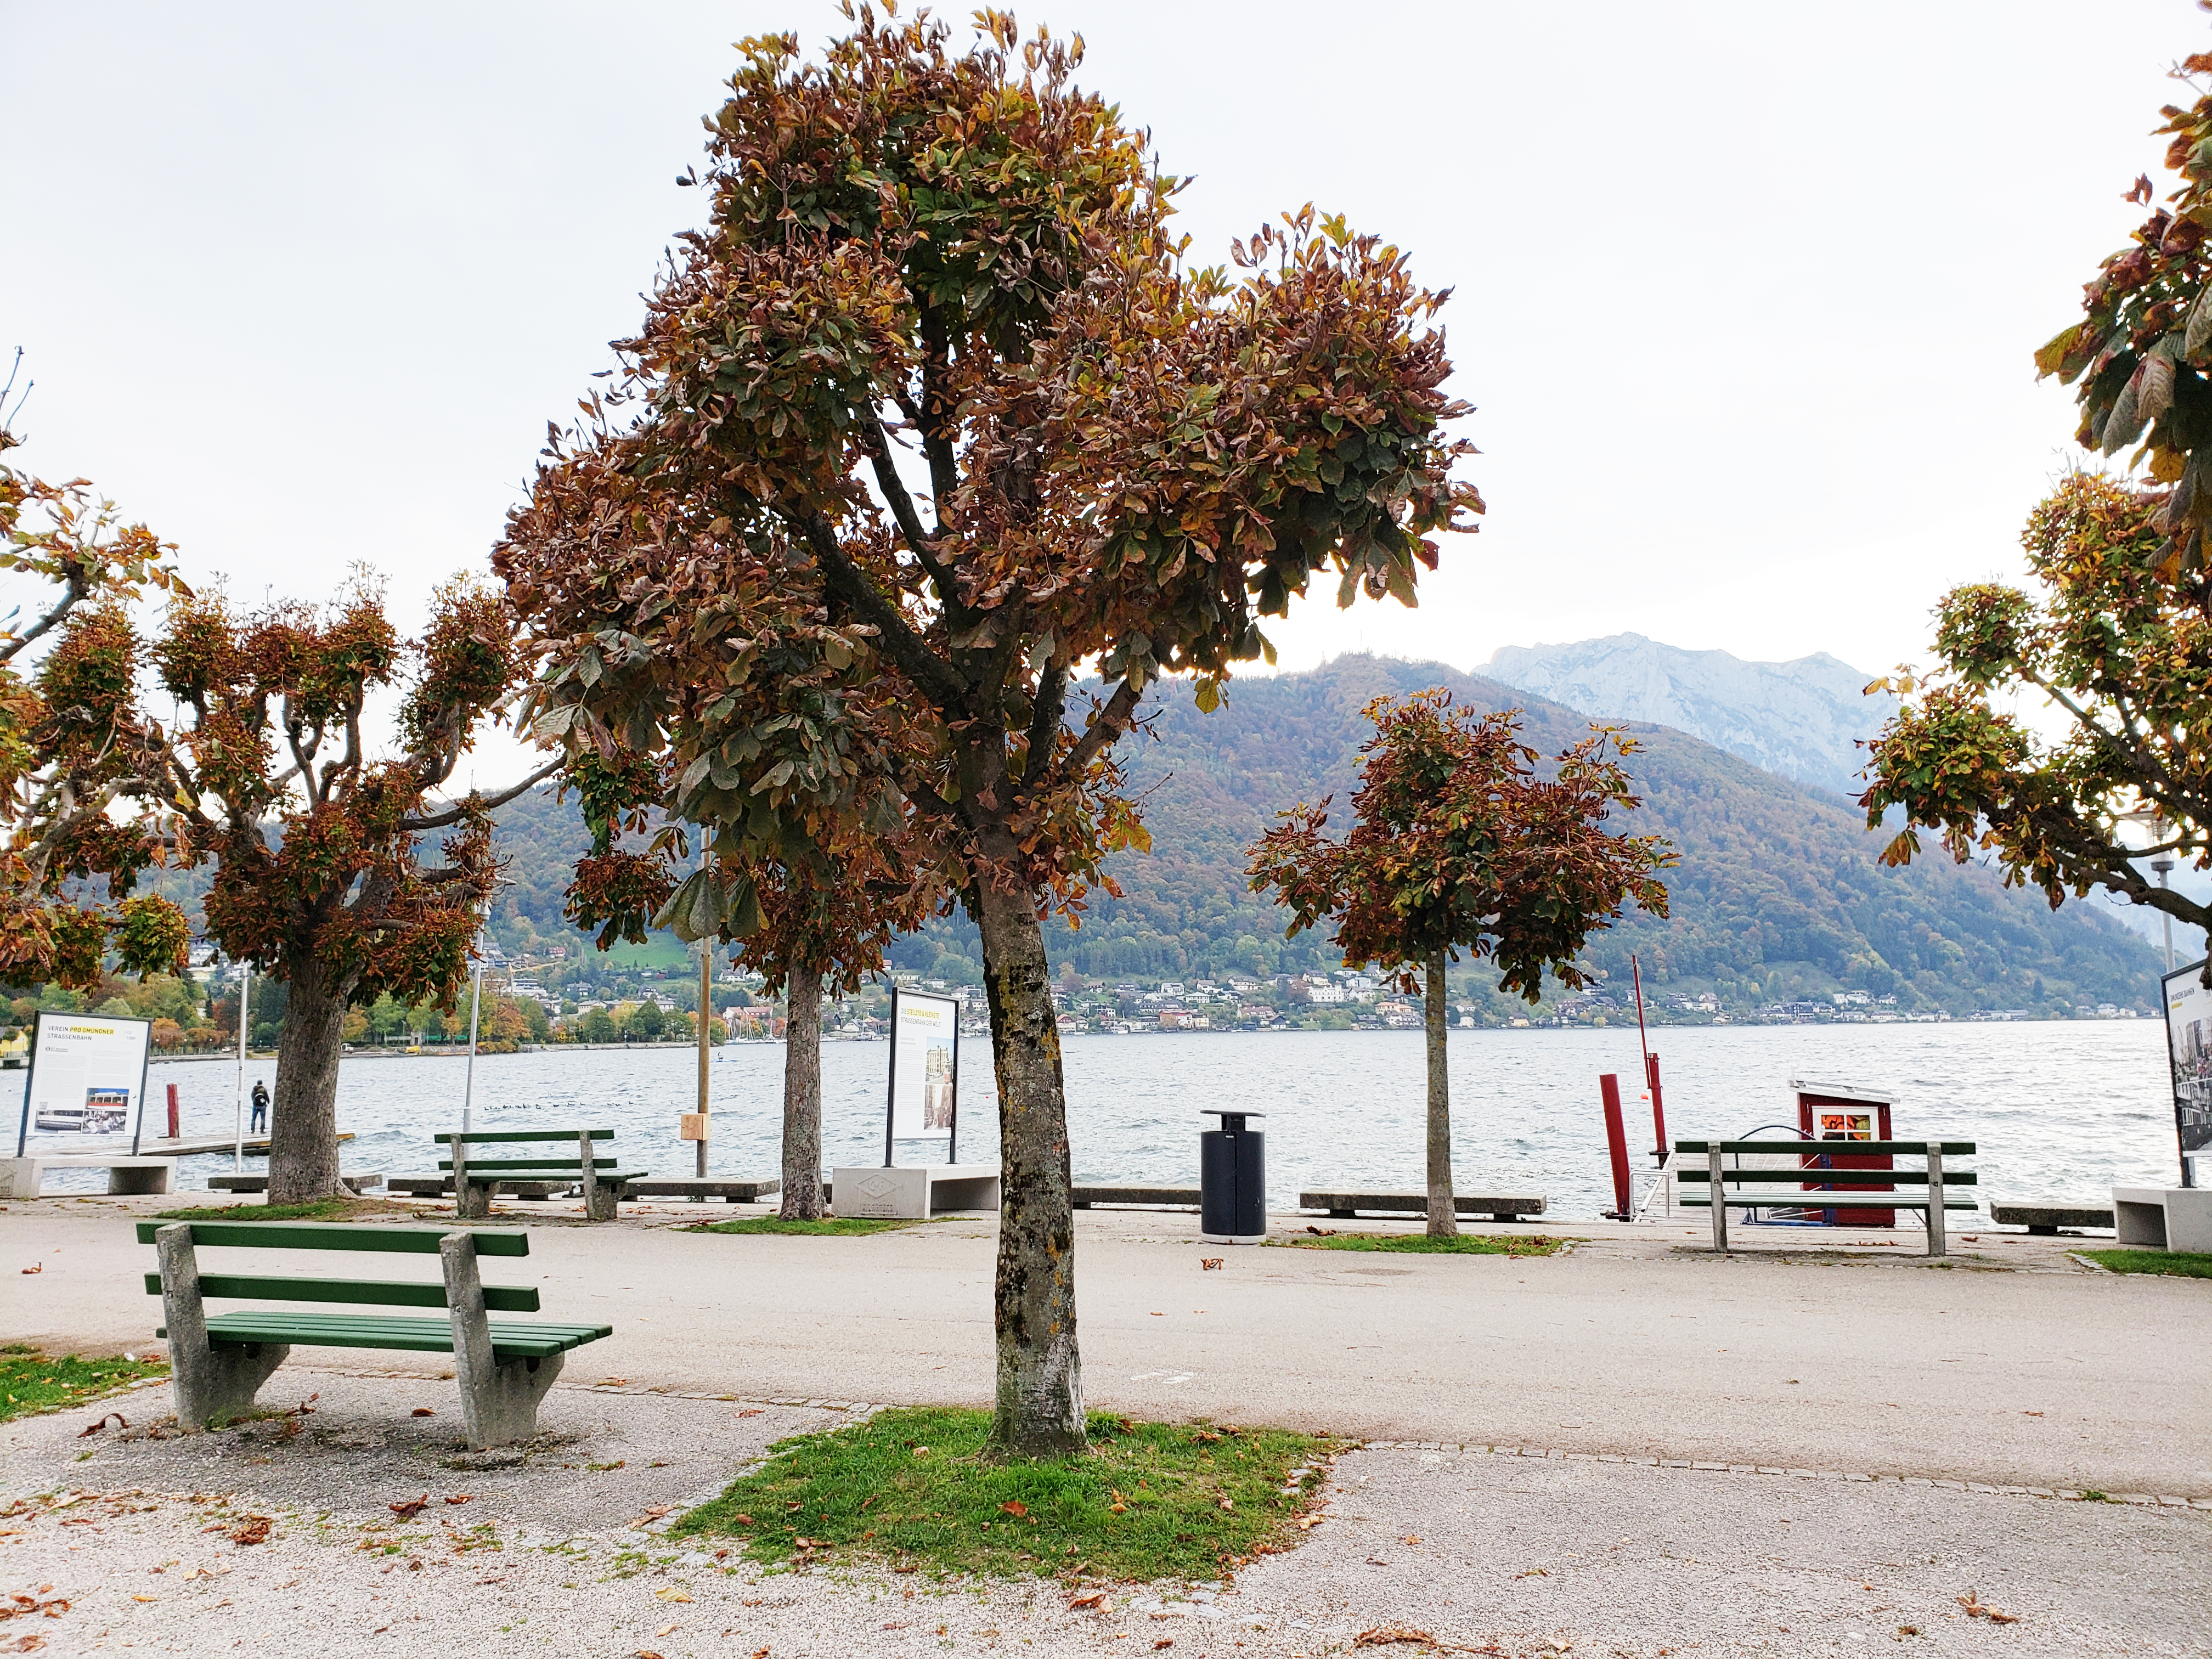 A_Complete_Guide_To_Gmunden_Austria